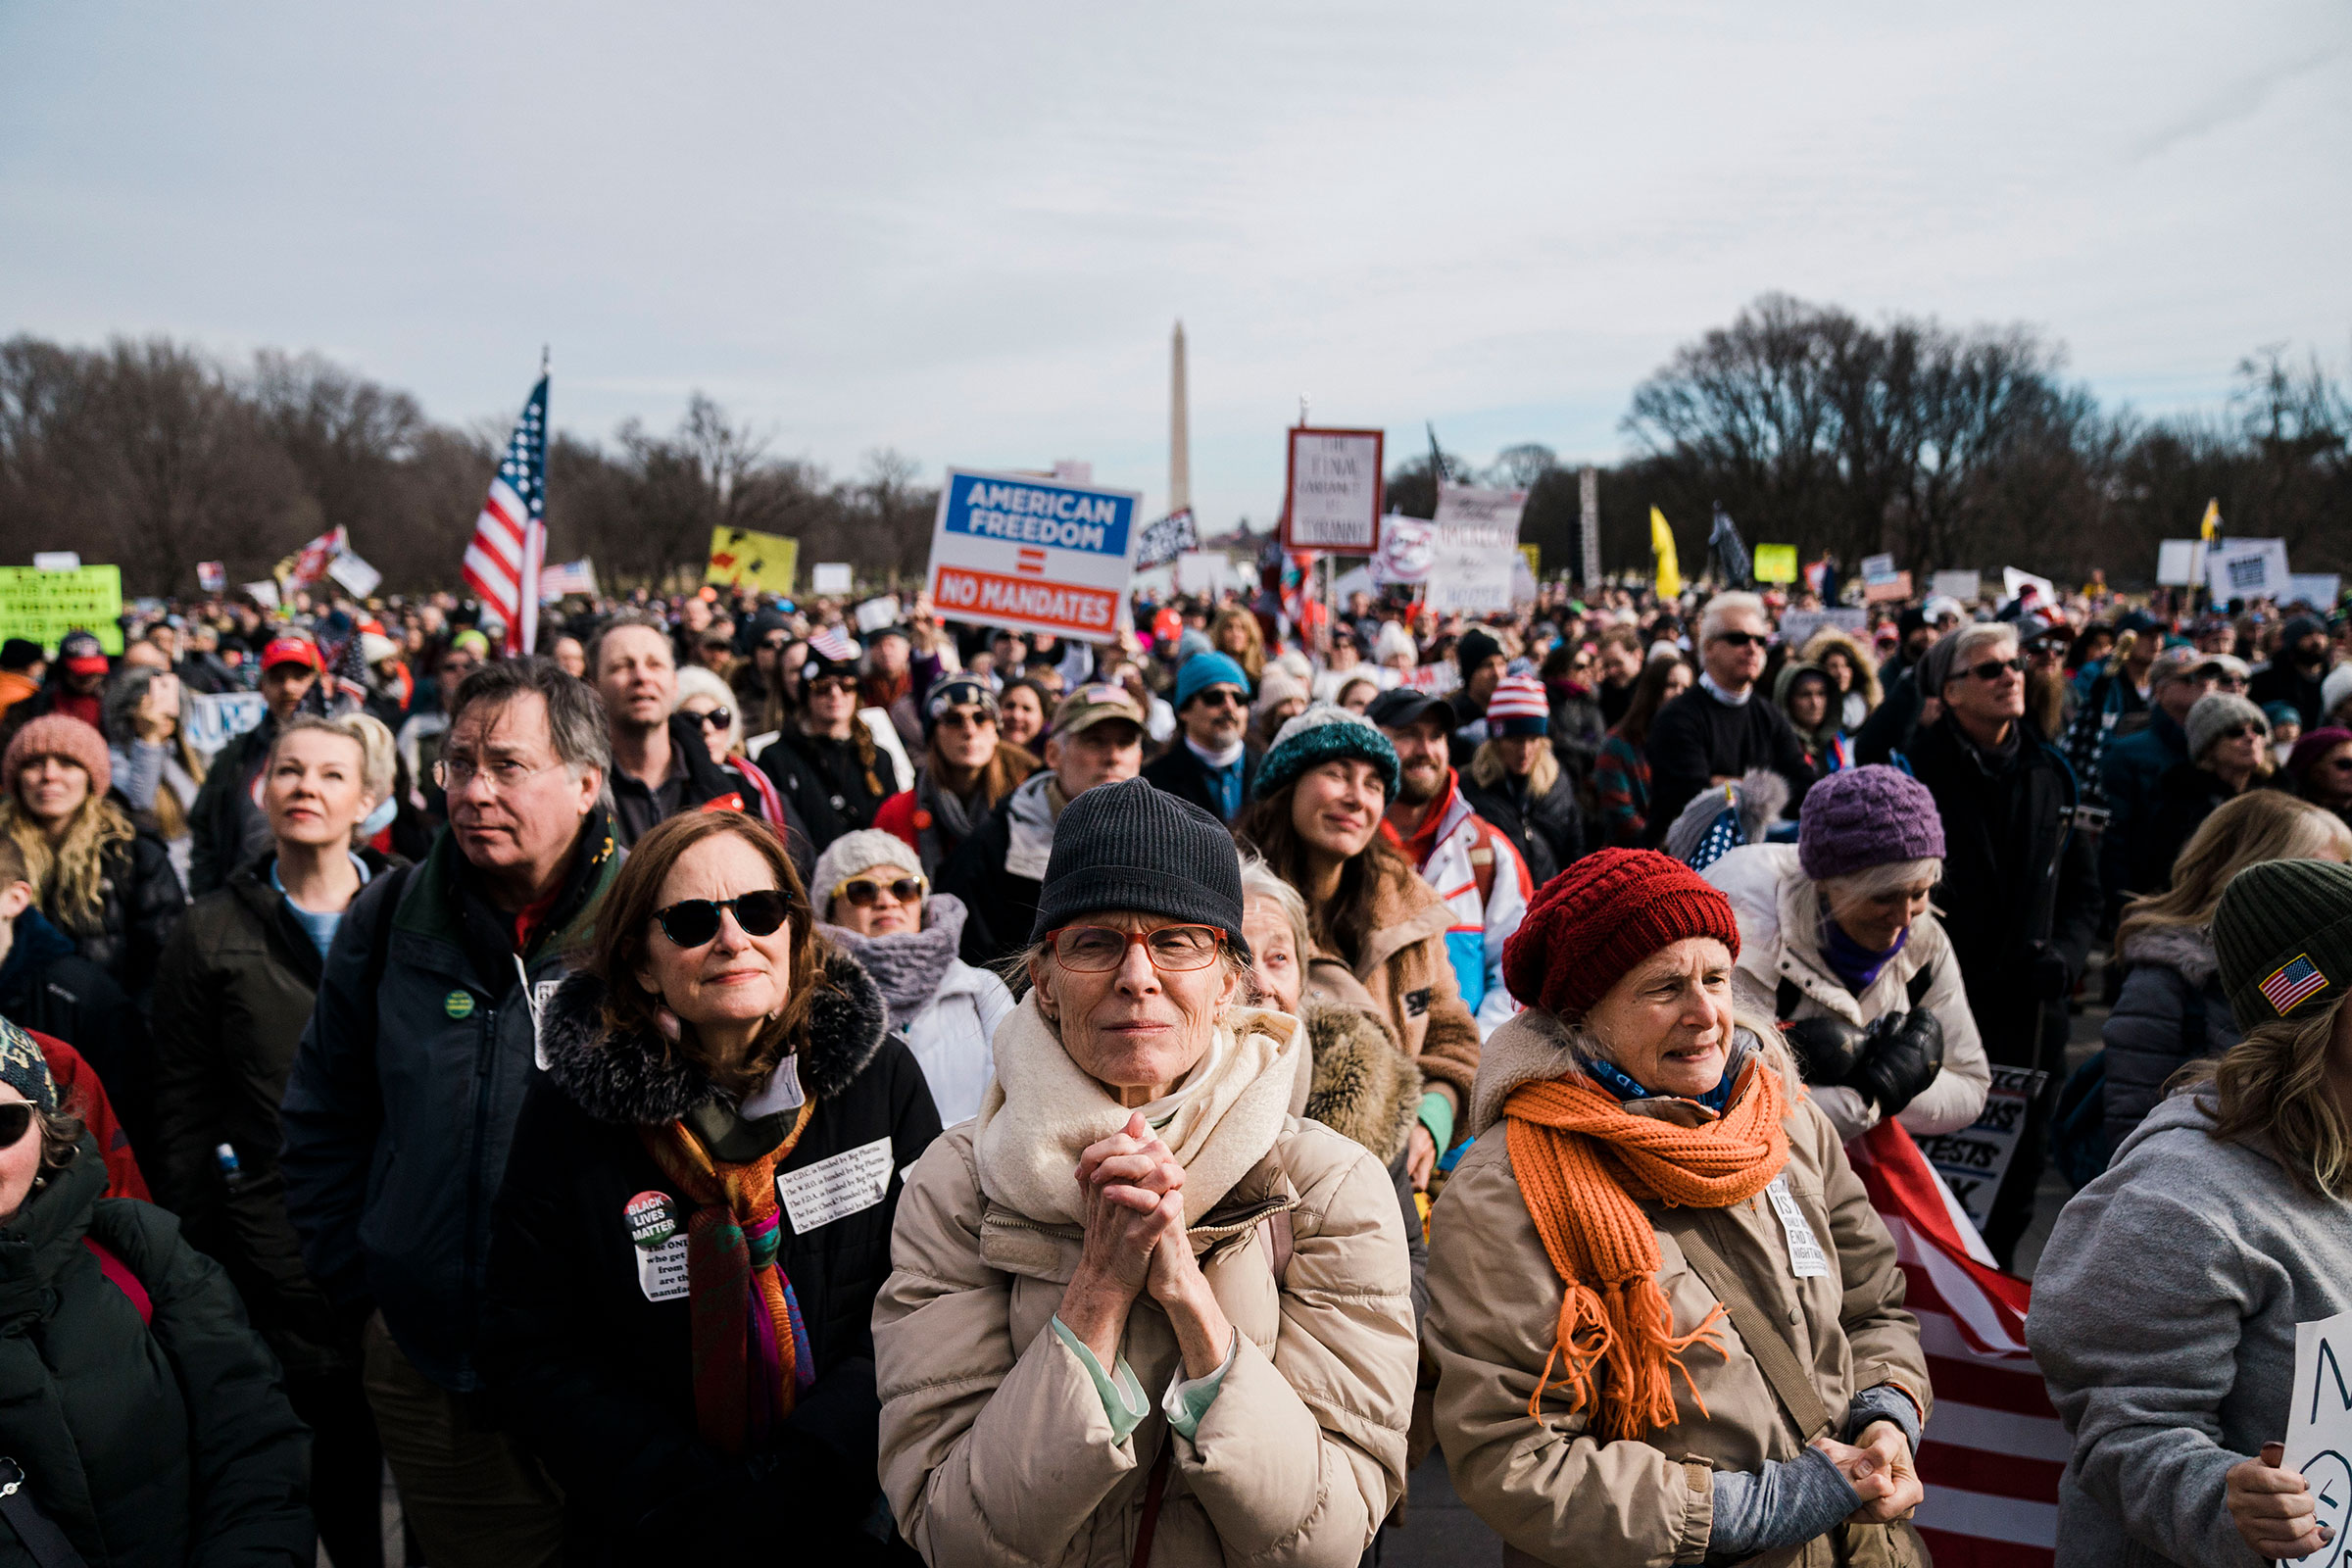 Jenny Burrill, of Brooklyn, NY and others listen to speakers during a Defeat the Mandates Rally, on National Mall in Washington, on Jan. 23, 2022. (Kent Nishimura—Los Angeles Times/Getty Images)